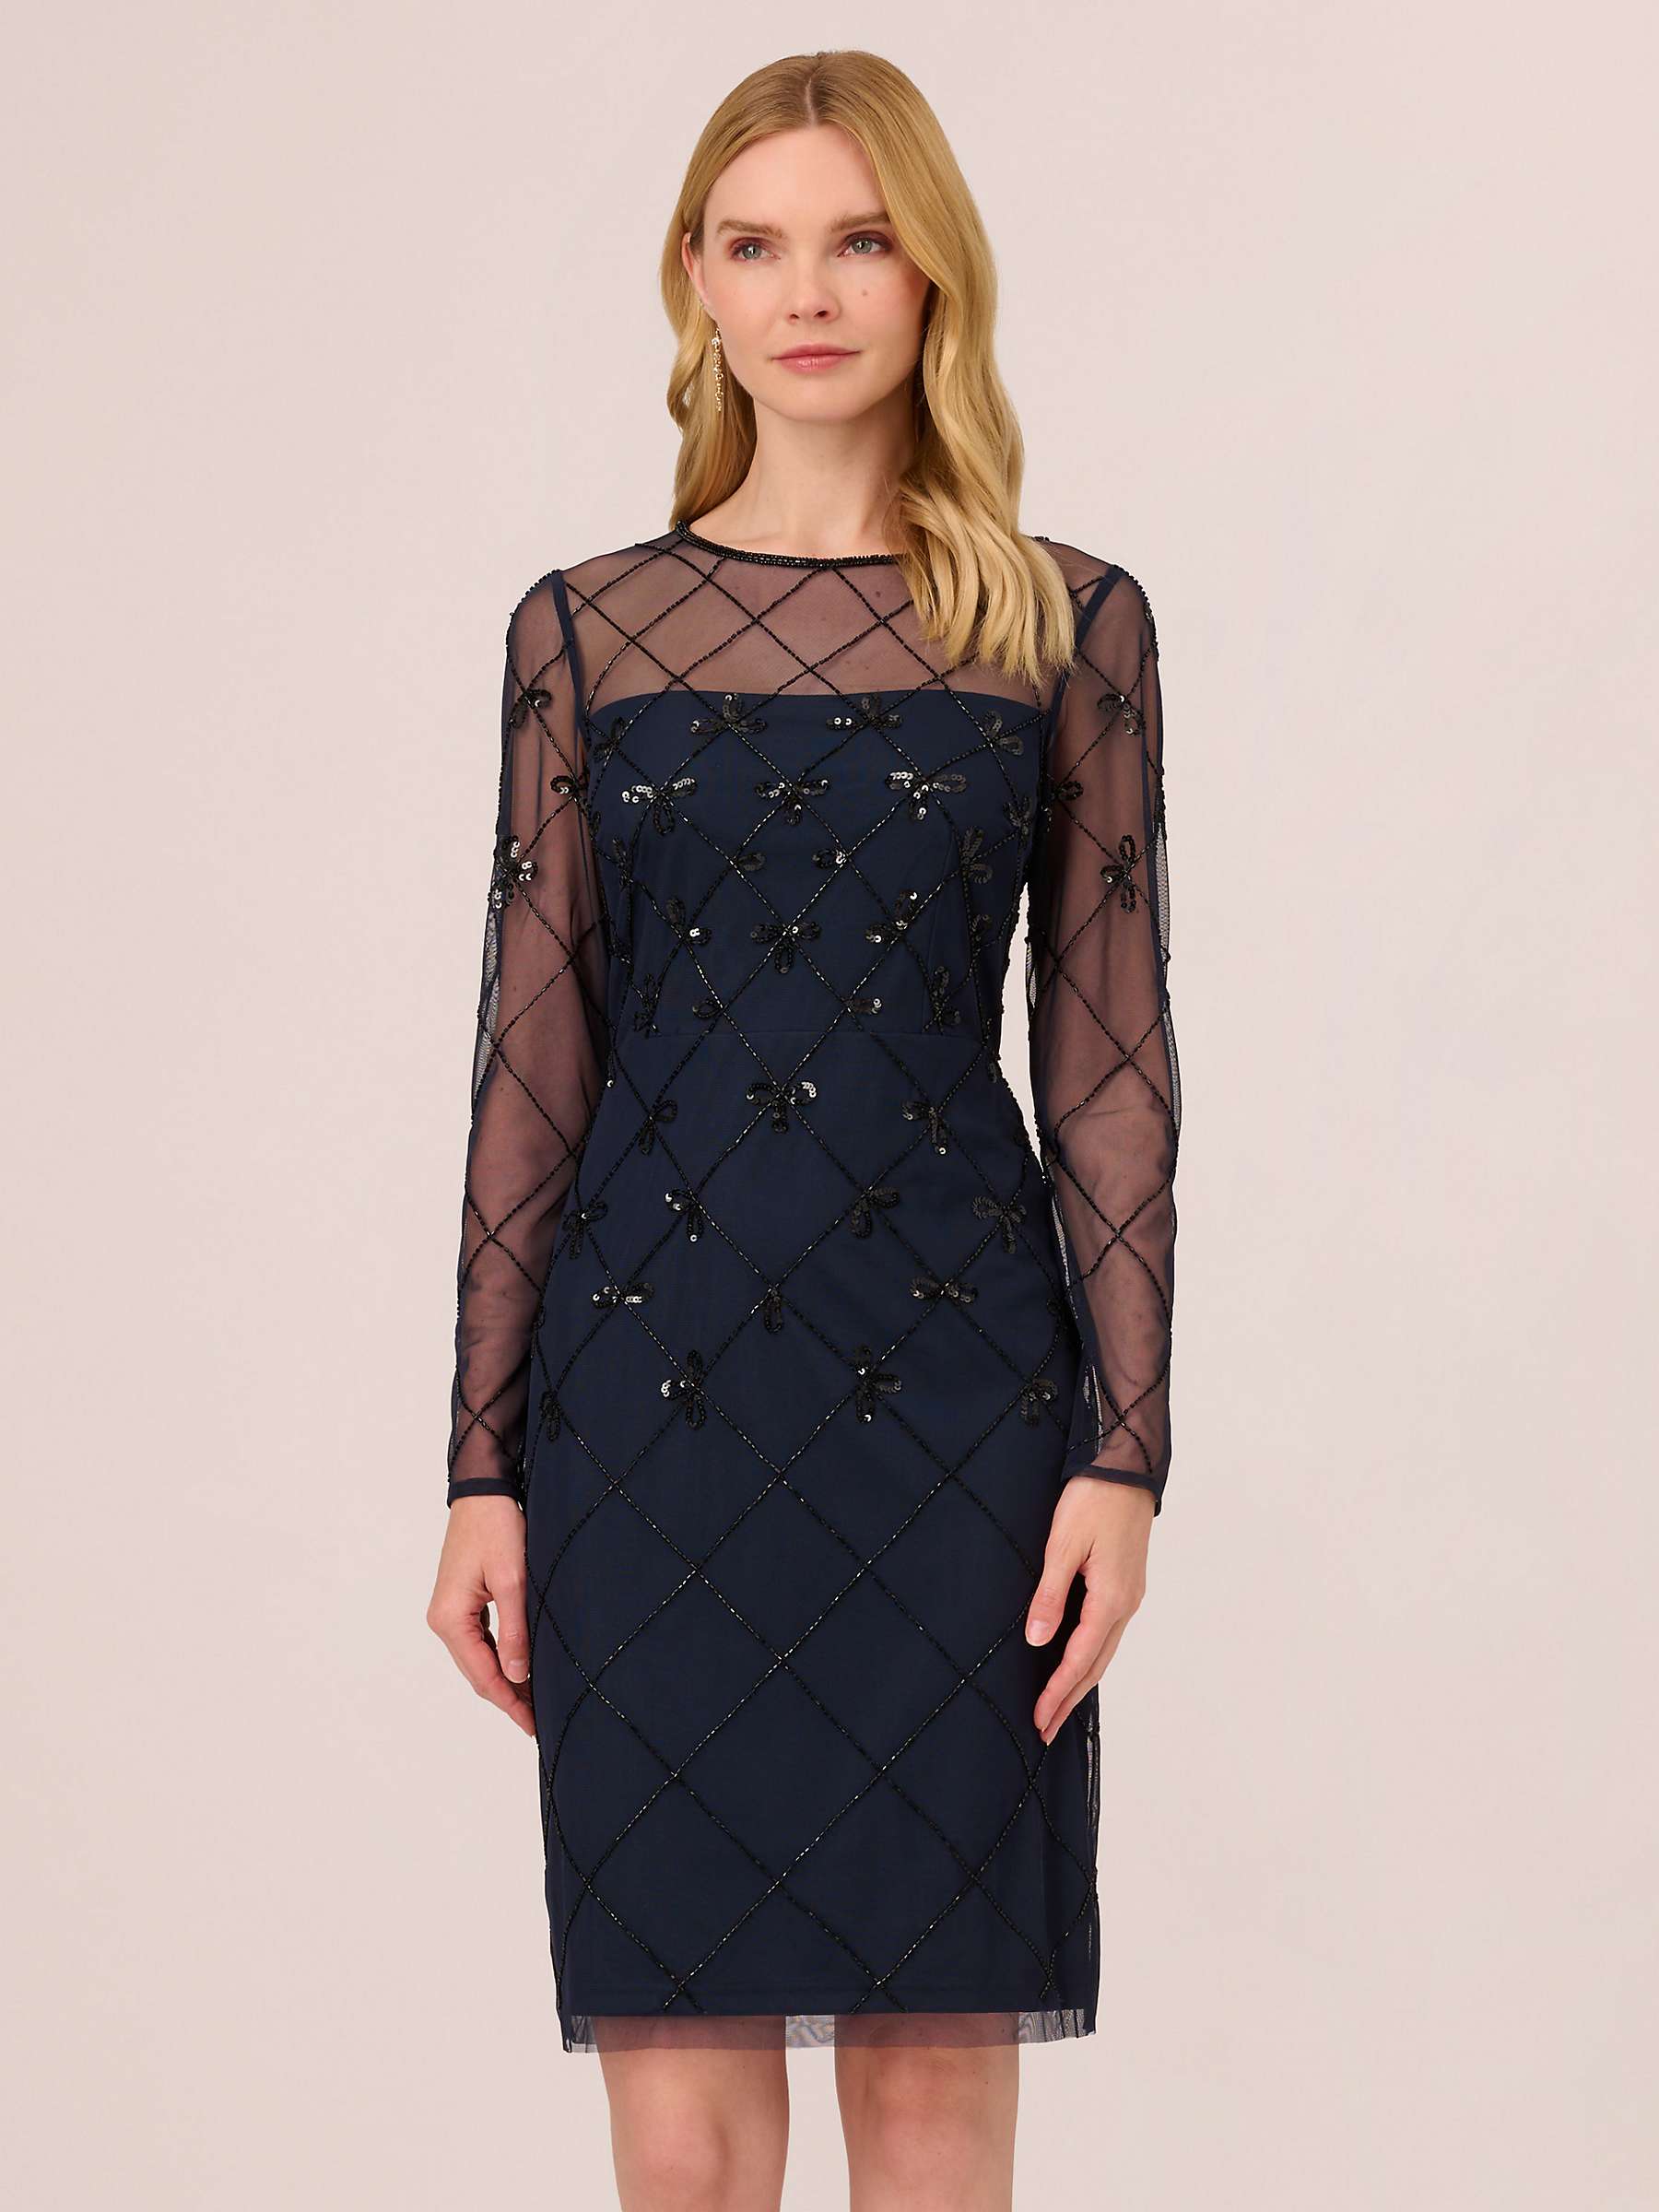 Buy Adrianna Papell Papell Studio Embellished Cocktail Dress, Navy/Black Online at johnlewis.com